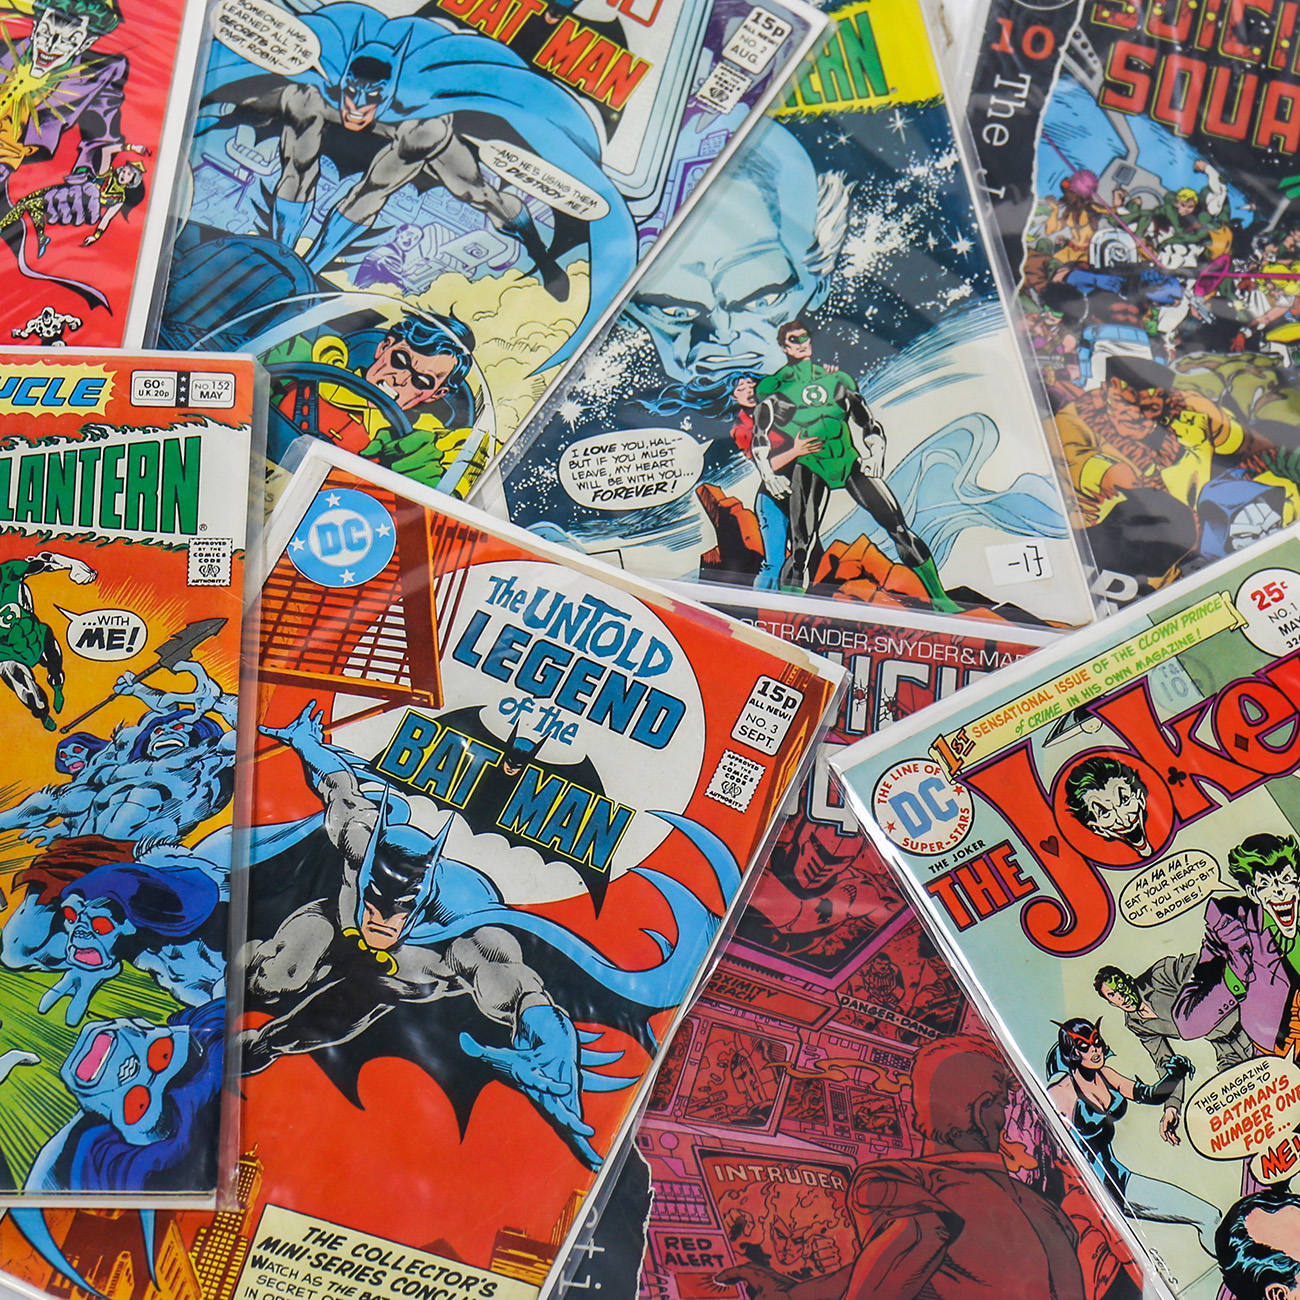 Holy Comic Book Auctions!  